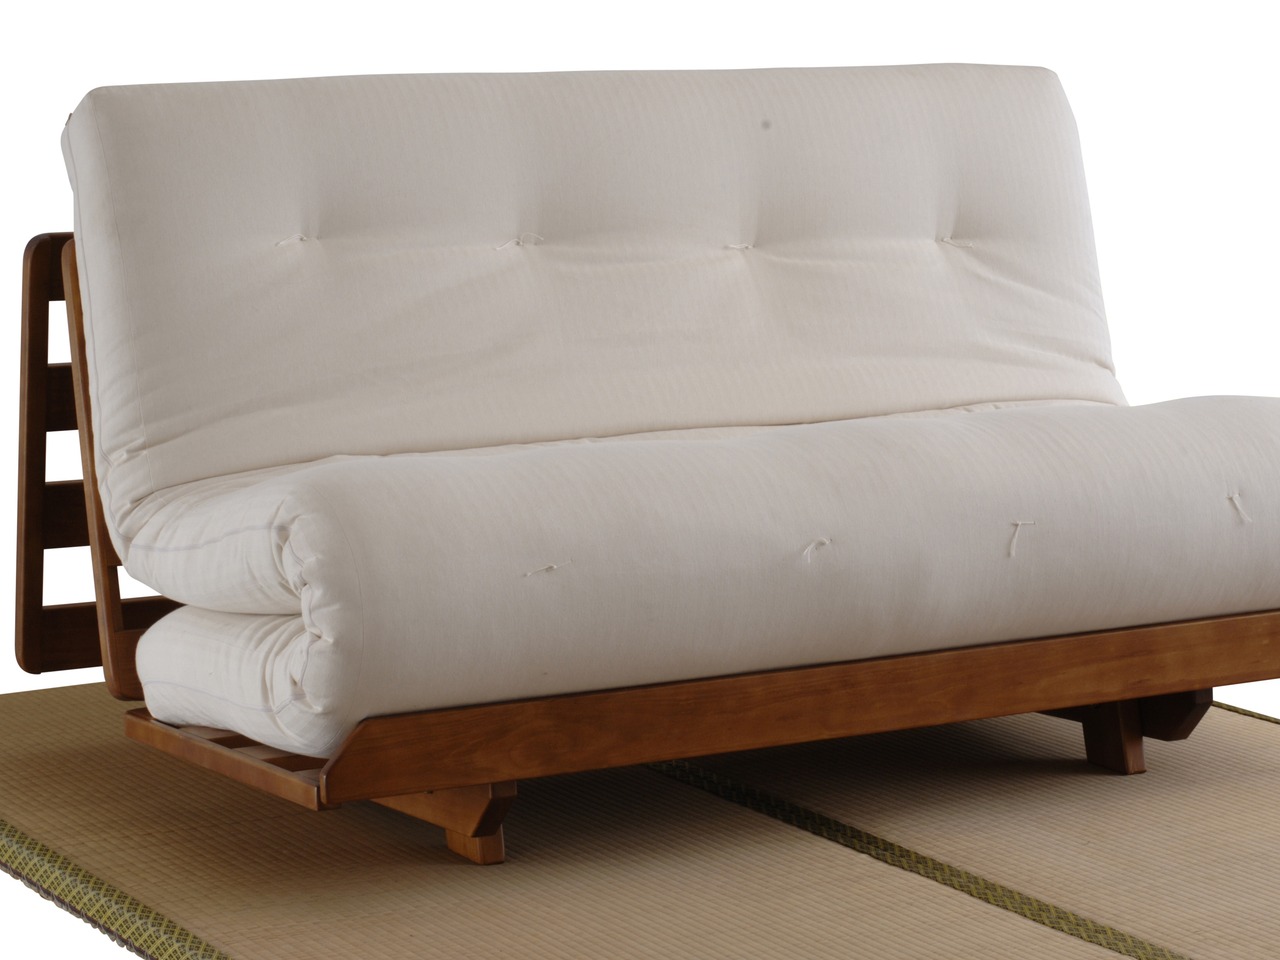 3 Fold Sofa Bed By Zen Beds And Sofas By Dan Walker